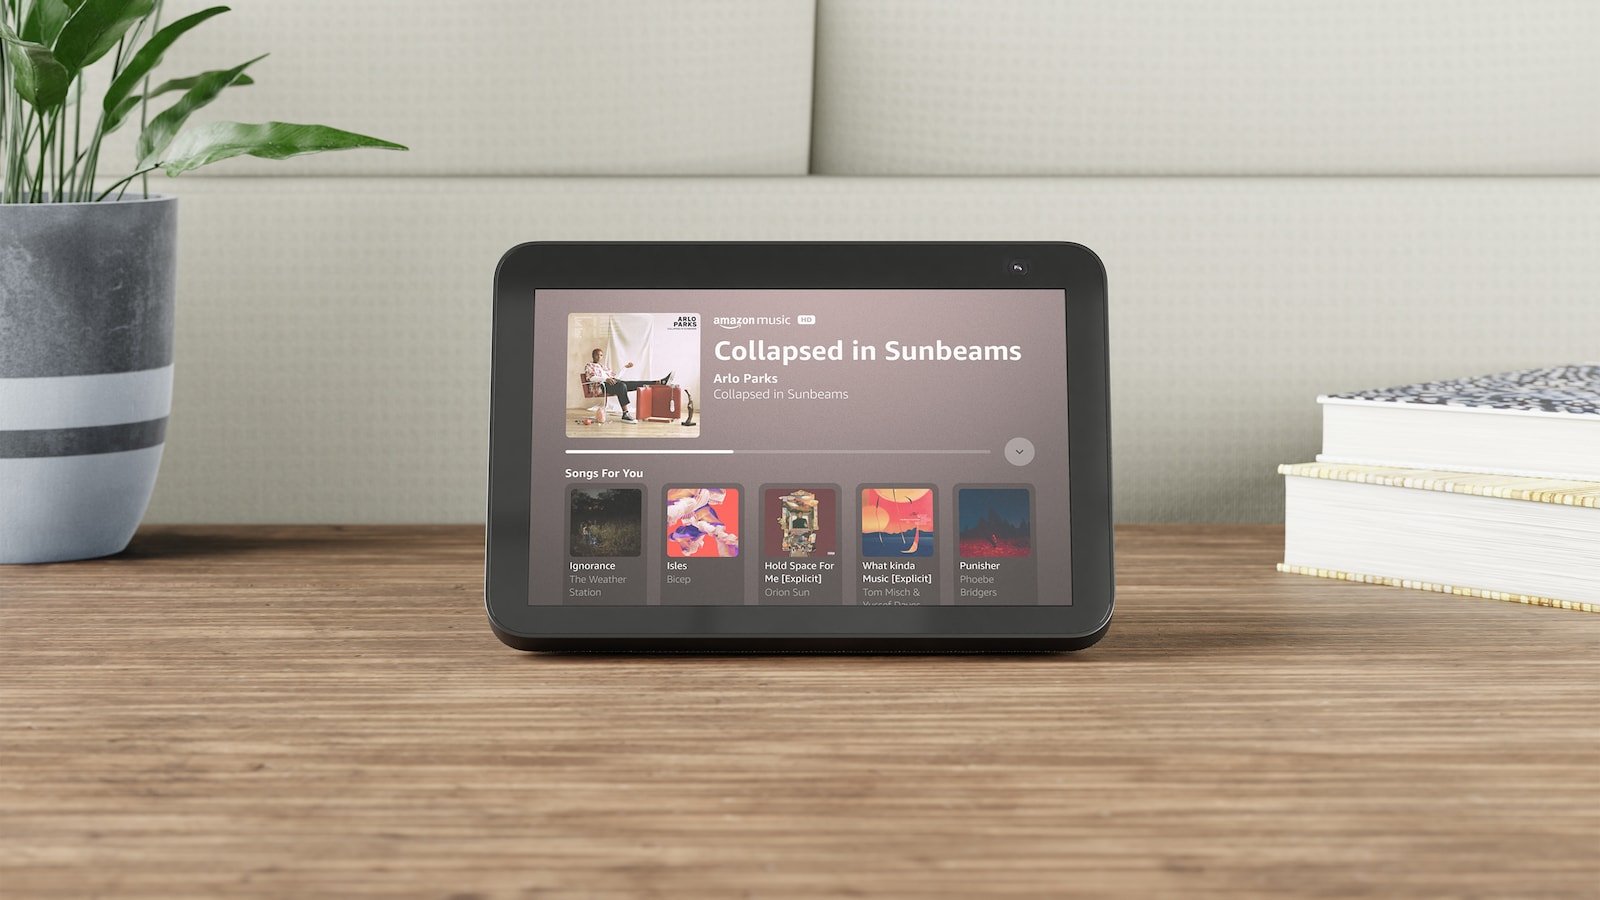 Amazon Echo Show 8 2nd-Gen smart display has stereo speakers and an 8″ display